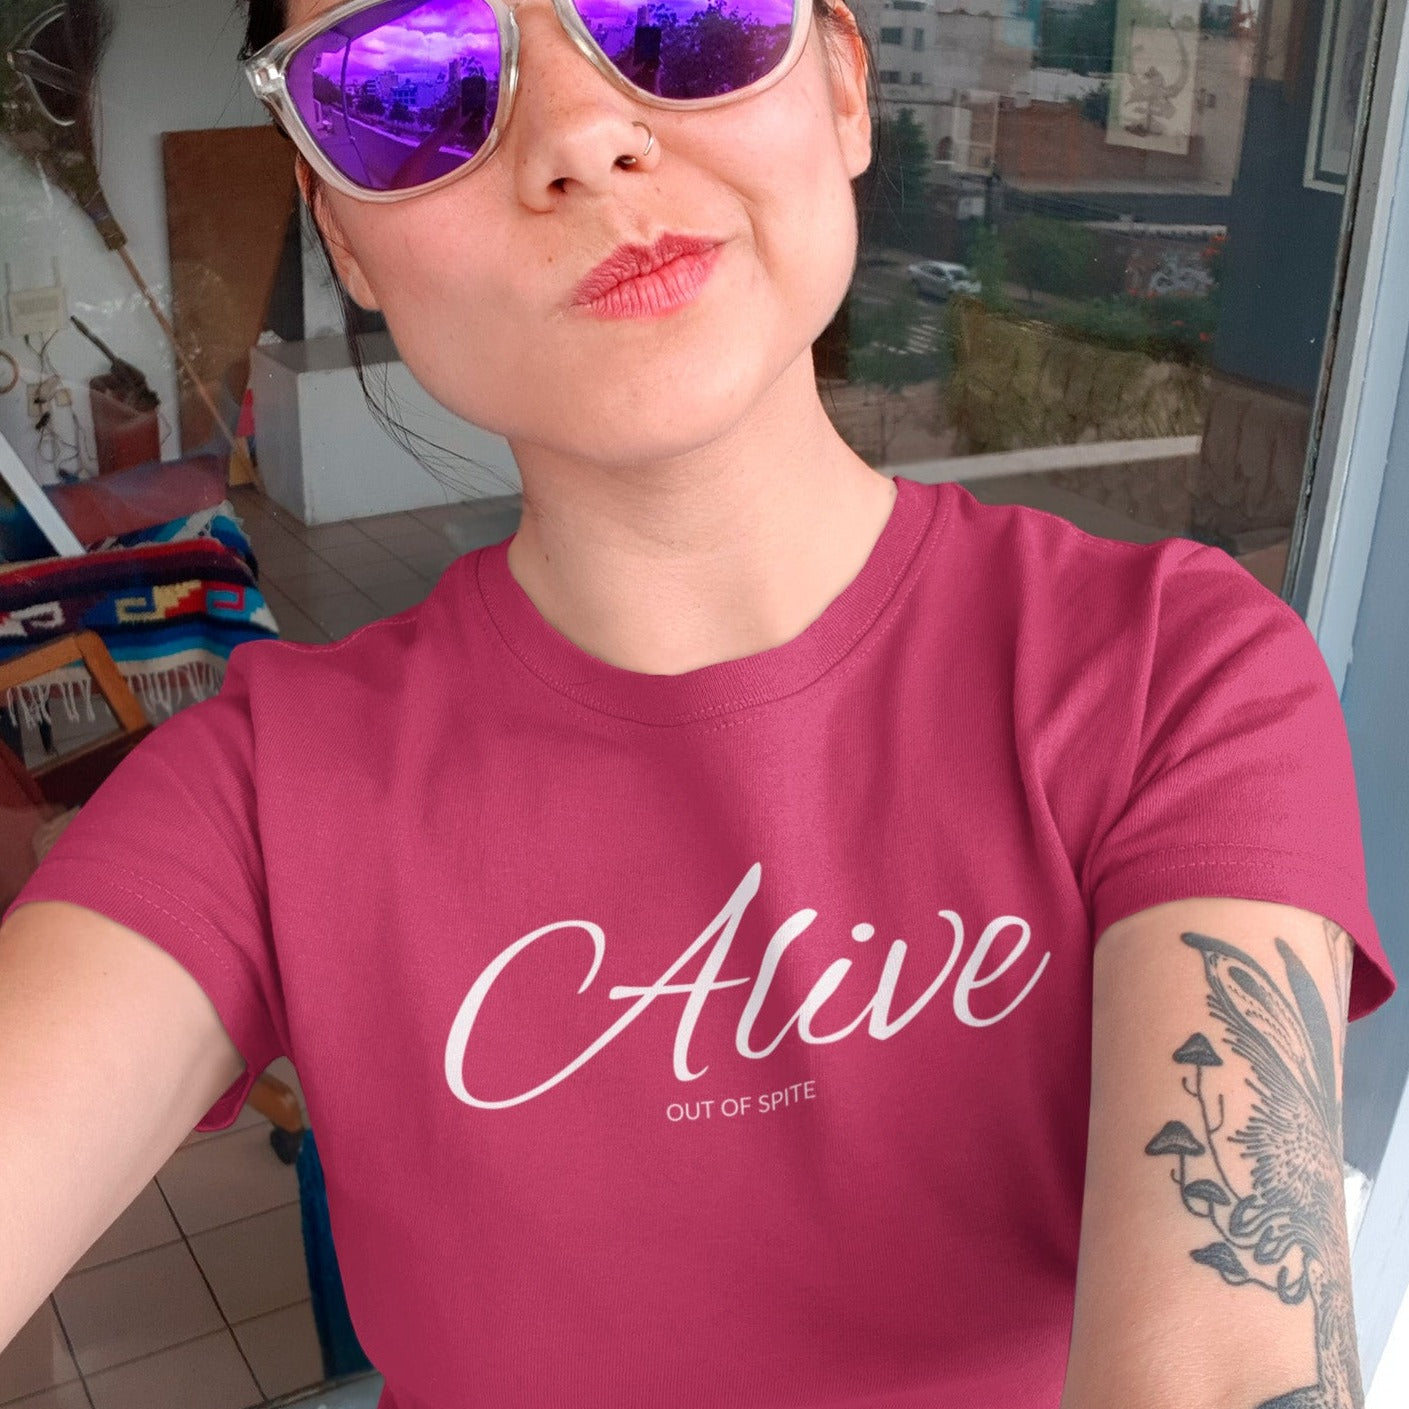 alive-out-of-spite-berry-t-shirt-funny-mockup-of-a-tattooed-woman-with-sunglasses-taking-a-selfie